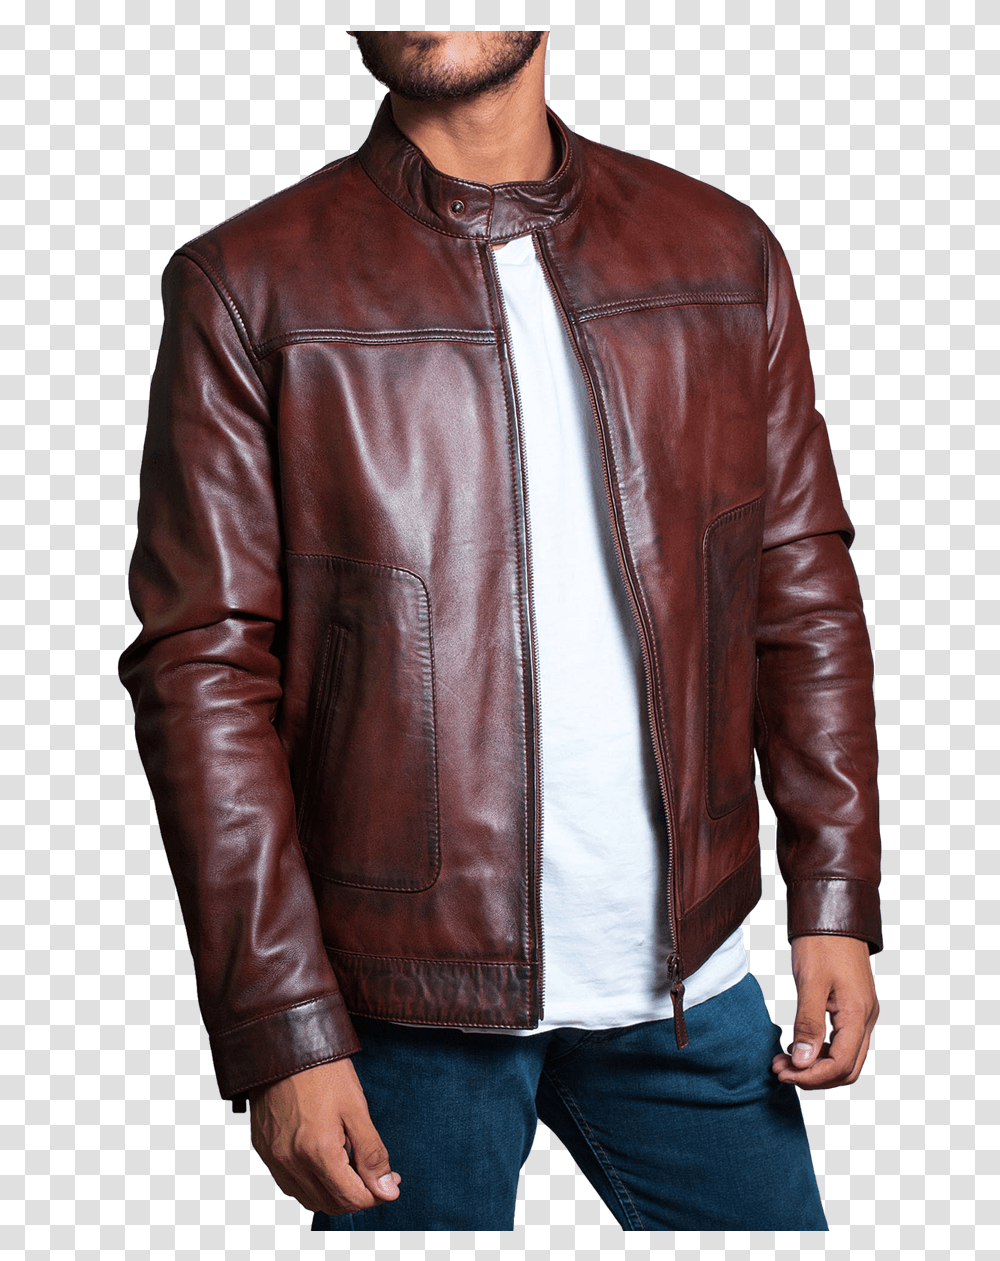 Leather Jacket Cartoons Leather Jacket Photo Download, Apparel, Coat, Person Transparent Png